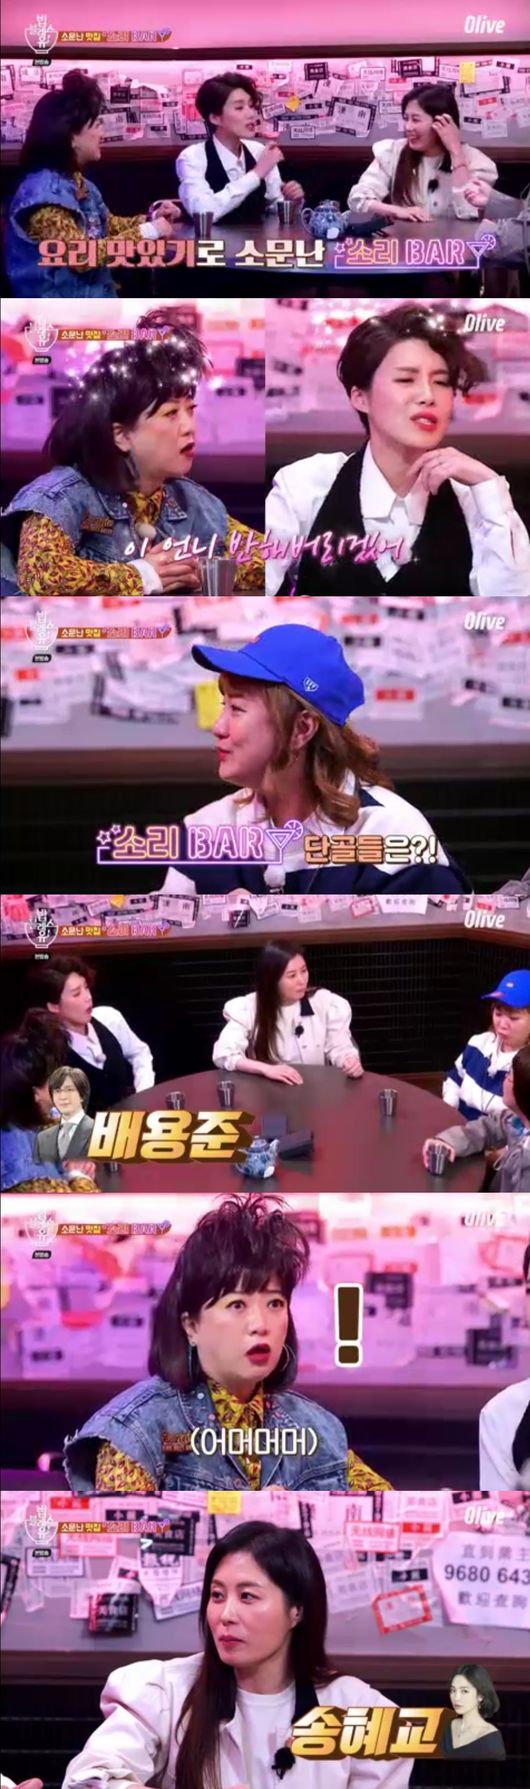 If there was a narava in Seoul, there was a soriva in Dongtan.Park Na-rae and Song Eun-yi were welcomed when Moon So-ri appeared on Olive Bob Blessou broadcast on the afternoon of the 12th.Last 3! 4! The second liquor game Liar after the game started.Todays Jesse said, Jang Doyeon was originally popular, but it became more popular, Park Na-rae said it was a high-end food.Park Na-rae was suspected of being Liar when he said he was confused when he said he was high-end.Song Eun-yi, who throws ambiguous words that he has never eaten with his bow, although it was not as delicious as expected.Song Eun-yi was named the culprit, with Kim Sook and Song Eun-yi receiving two votes each.Park Na-rae and Jang Doyeon who fall to the wrong answer of birth.Four people moved to the Chinese house. It was a hip in Hannam-dong.On the way to meet Life Sister, Kim Sook laughed at Song Eun-yis words I was hot here before saying They are thirty-five too.The first life sister of the day was Moon So-ri Park Na-rae, a entertainer, he said.Moon So-ri, who recently directed Top Model while filming Actor is Today.Kim Sook said that he wanted to try Top Model in the production this time, and Kim Sook said he did not like his job.No, Moon So-ri, who doesnt have many days of Acting a year, has complained about not having much casting. 7 p.m.The members were surprised to hear that they were eating their first meal now, and when asked by Park Na-rae whether they were drinking, Moon So-ri said that when I died, I would not think I was sorry to drink less.Real Joo Sang-jeom Meet Meet, laughed Moon So-ri at Park Na-raes remark.If there was a narava in Seoul, there was a soriva in Dongtan.Jang Doyeons mouth opened when he said that Bae Yong-joon, Mobilization, and Song Hye-kyo had come.Recently, the jury and the Usaengsoon team went there. Recently, a chori was a mafa tofu with mushrooms.Park Na-rae, who asked me to do you know how to eat Thai food when I said that I made sweat with colabi from Jeju.If you put fish sauce roughly, it tastes like that, Moon So-ri said.Park Na-rae said that when I heard you talking, I was curious about Moon So-ris food, saying that it smelled of coriander.When the steamed gabiri, miso and gori came out, the sisters hands were quickened; Moon So-ri, who ate constantly, nodded to Park Na-raes Are you okay?This is why I like my snacks, theres nothing stale and its all stimulating unconditionally, Park Na-rae said, biting and tearing off the chicken fries.When Kim Sooks eyes expanded, who ate Hong Kong-style gourds, they all reached for it.Park Na-rae, who said that it would be good to eat beer and drink, was filled with satiety, saying that he was drunk because he ate rice.Olive Bob Blessou broadcast screen capture